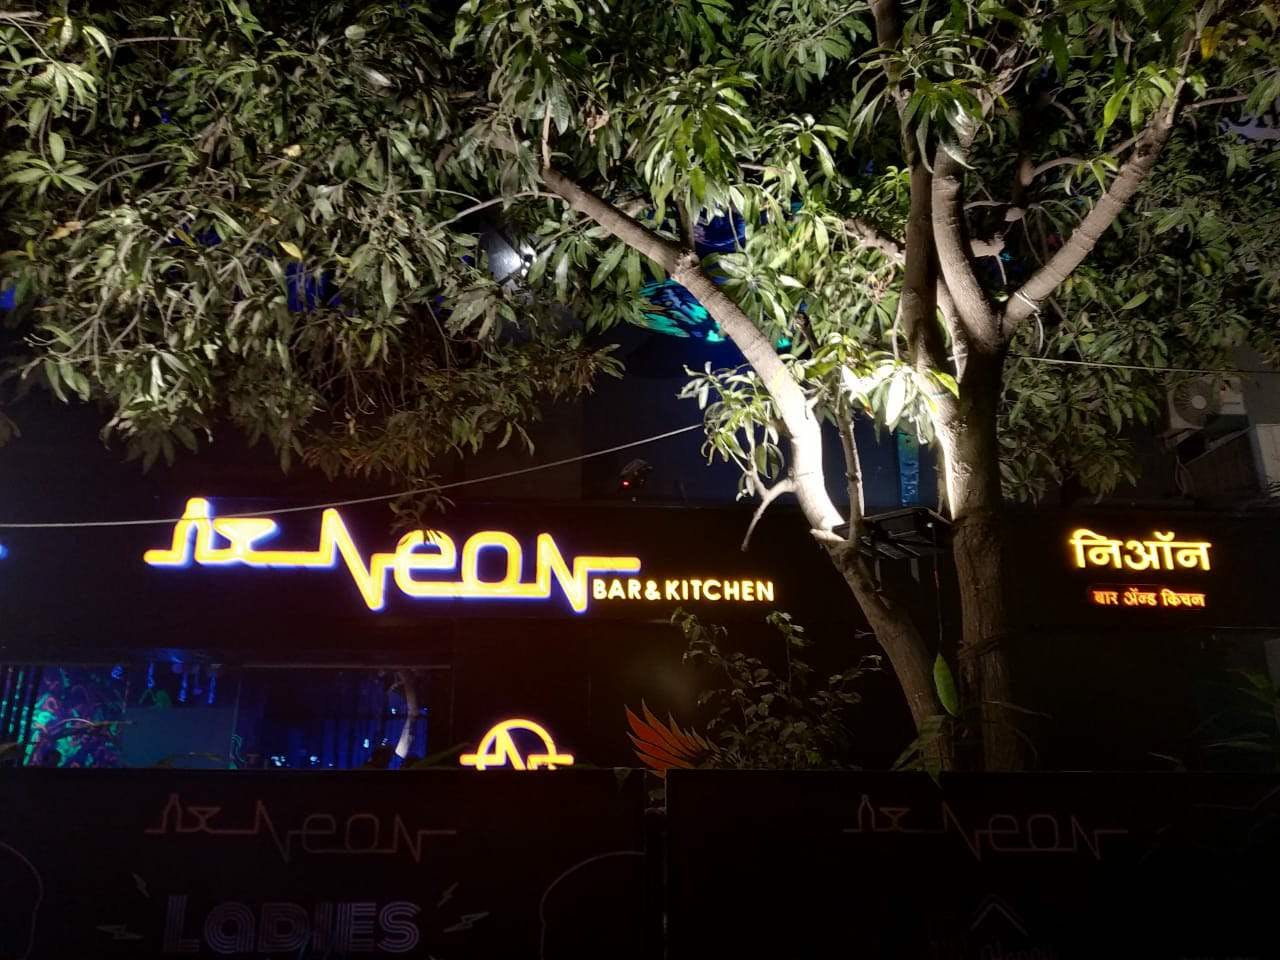 Neon Bar And Kitchen: Experience A Different Vibe